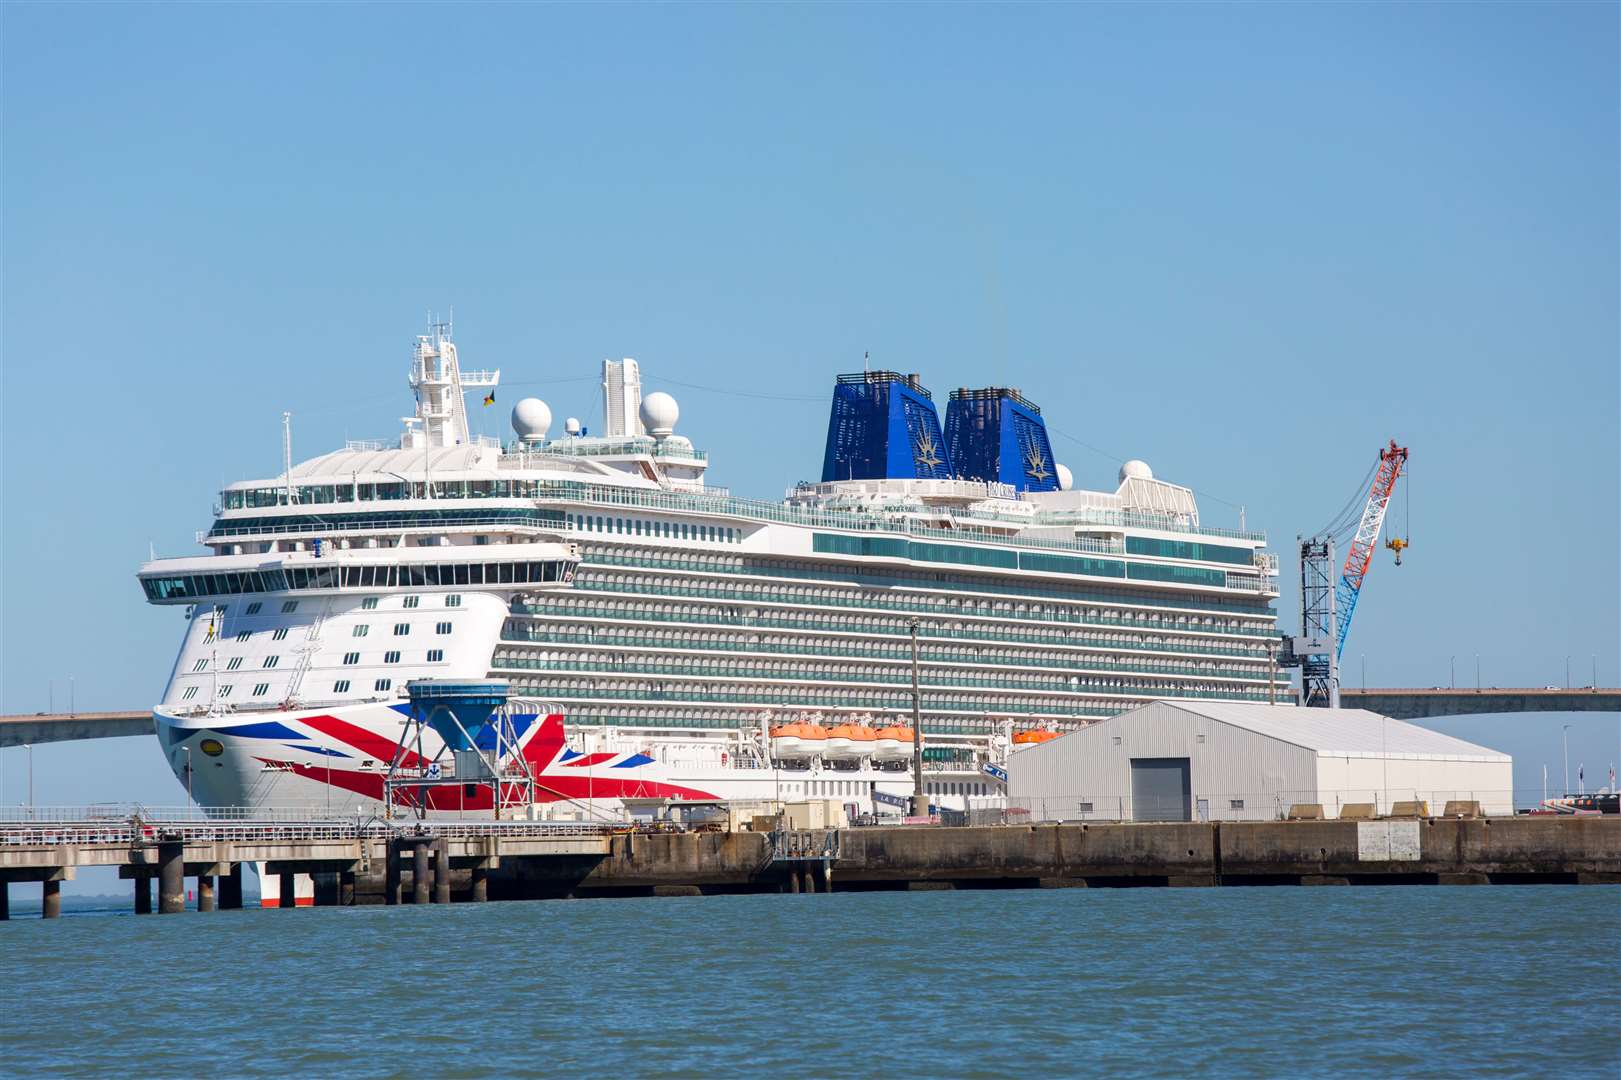 Murray Travel has reassured customers that P&O Cruises is a separate entity from P&O Ferries and that any planned holidays will be unaffected by the dispute.